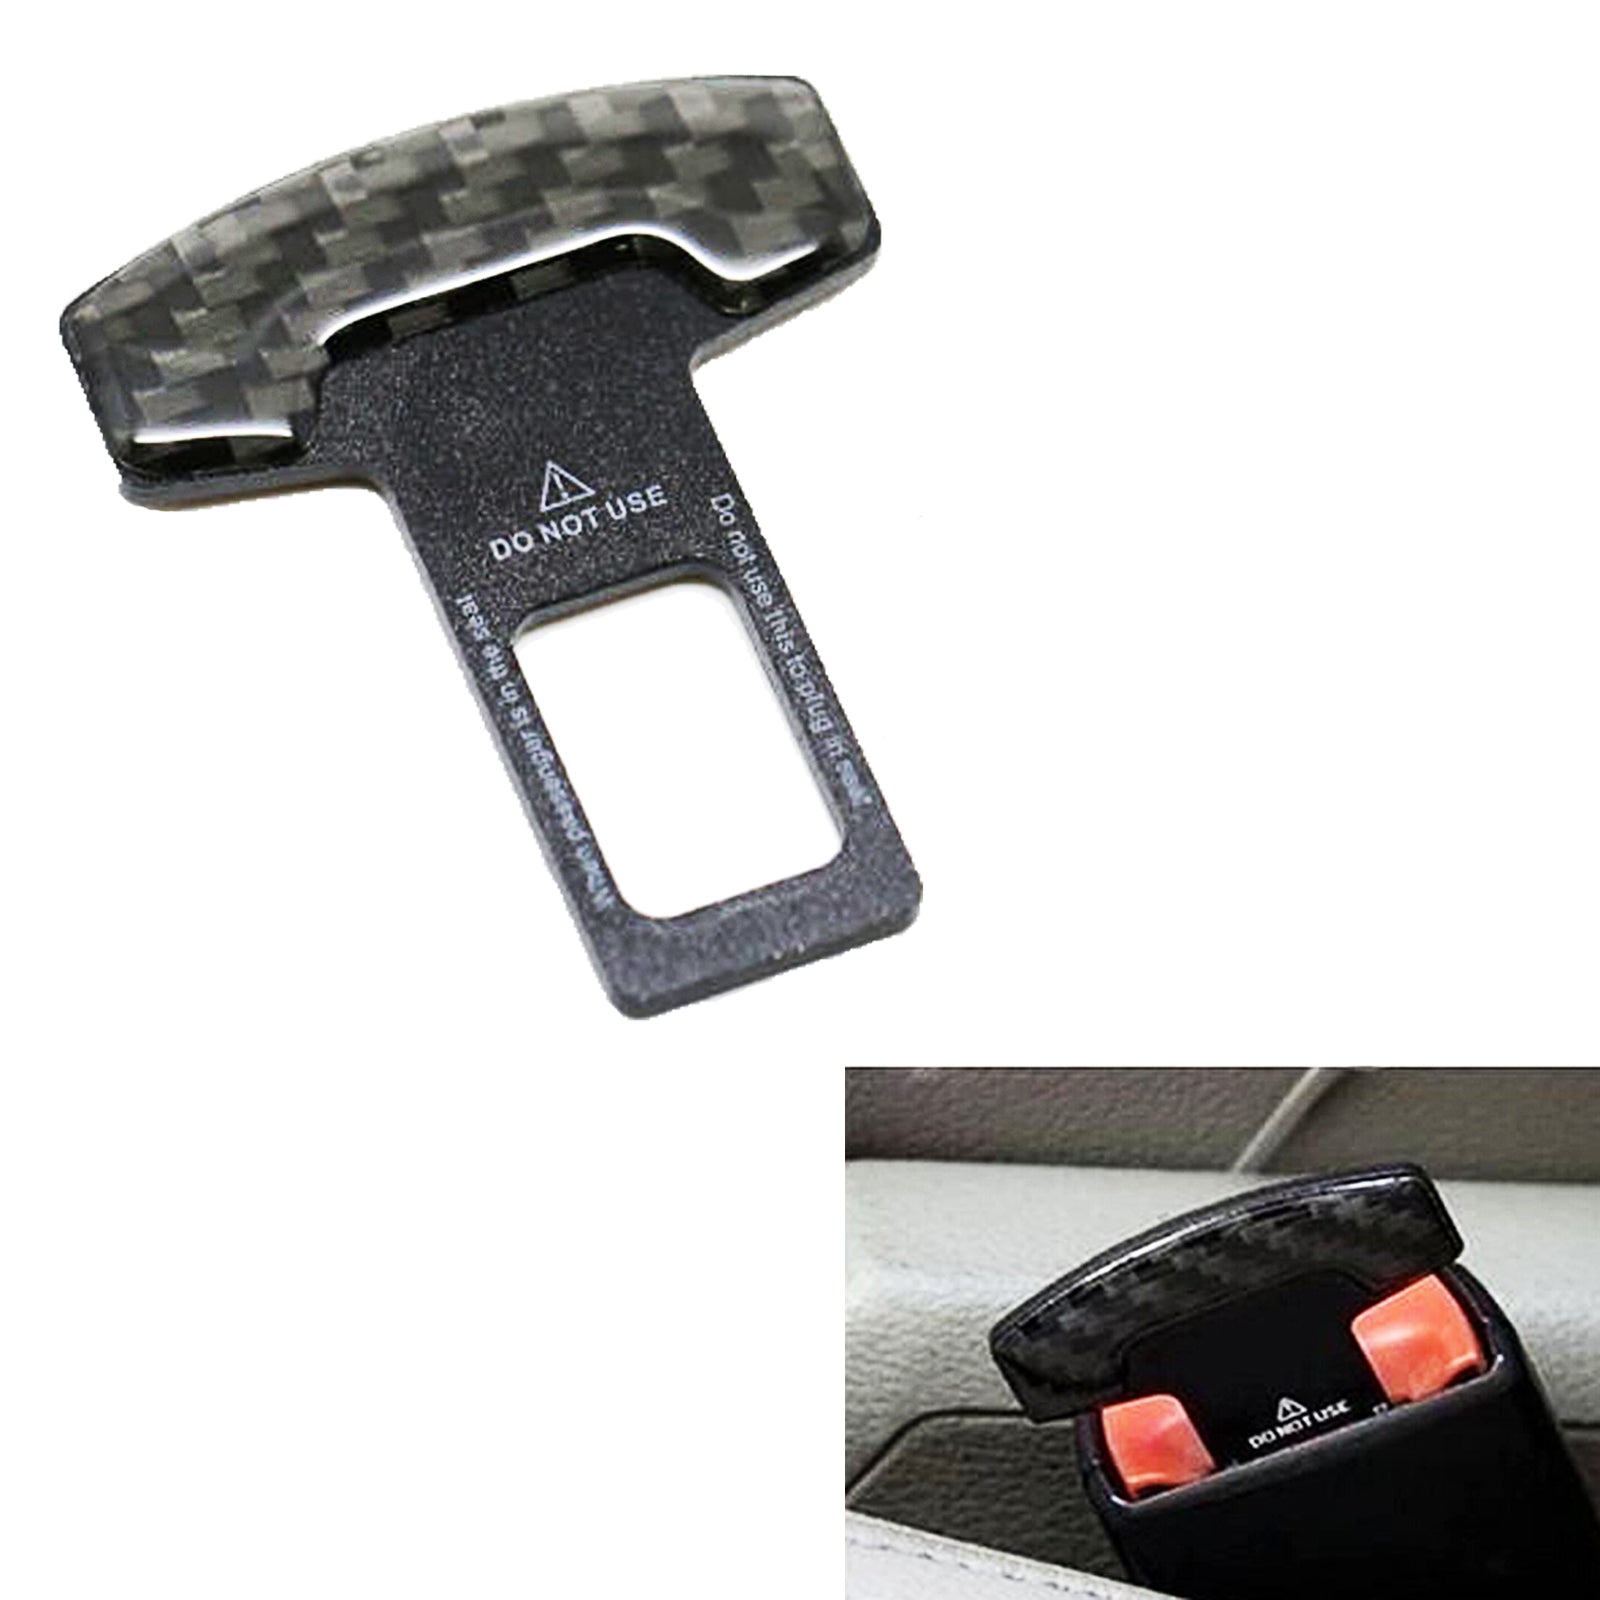 Auto Safety Belt Buckle Set: Style Decorative Car Accessories With Metal  Insert & Alert Feature From Fyautoper, $6.15